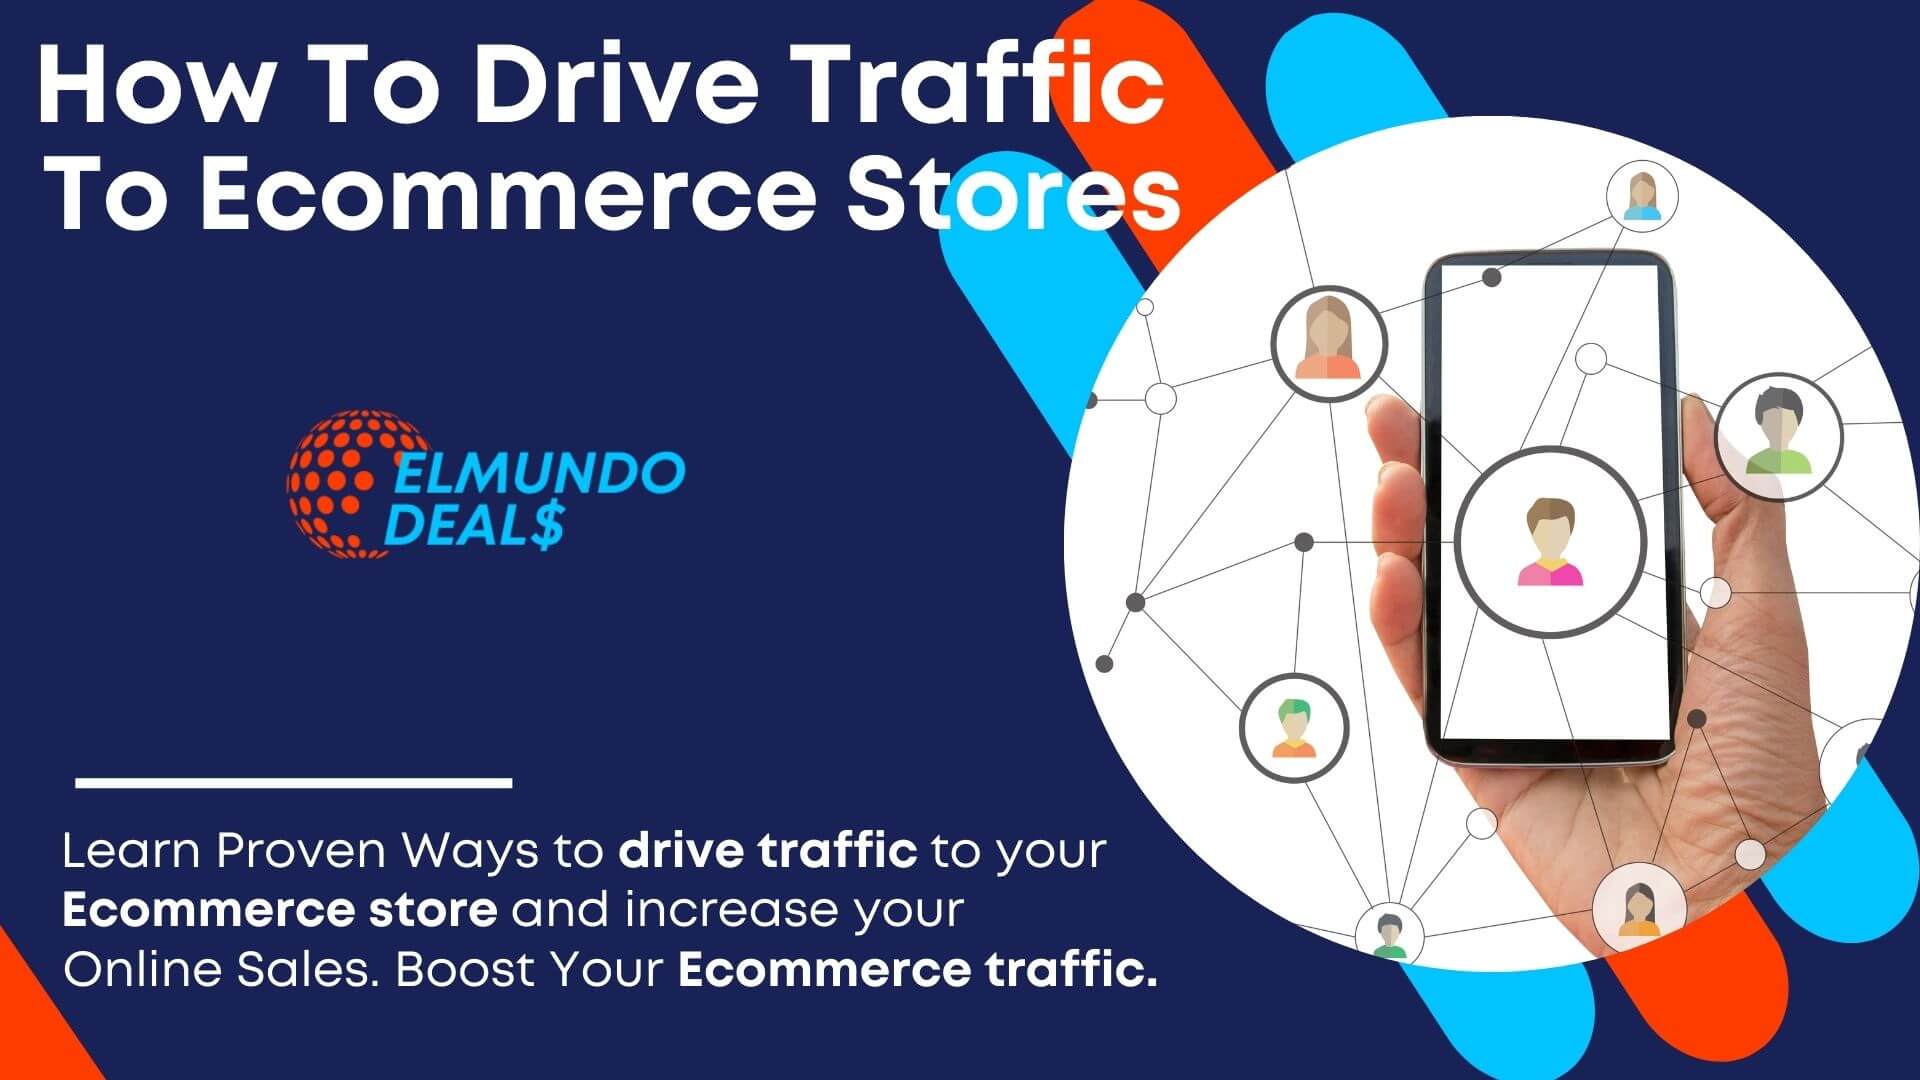 How To Drive Traffic To Your Ecommerce Store: 10 Proven ways